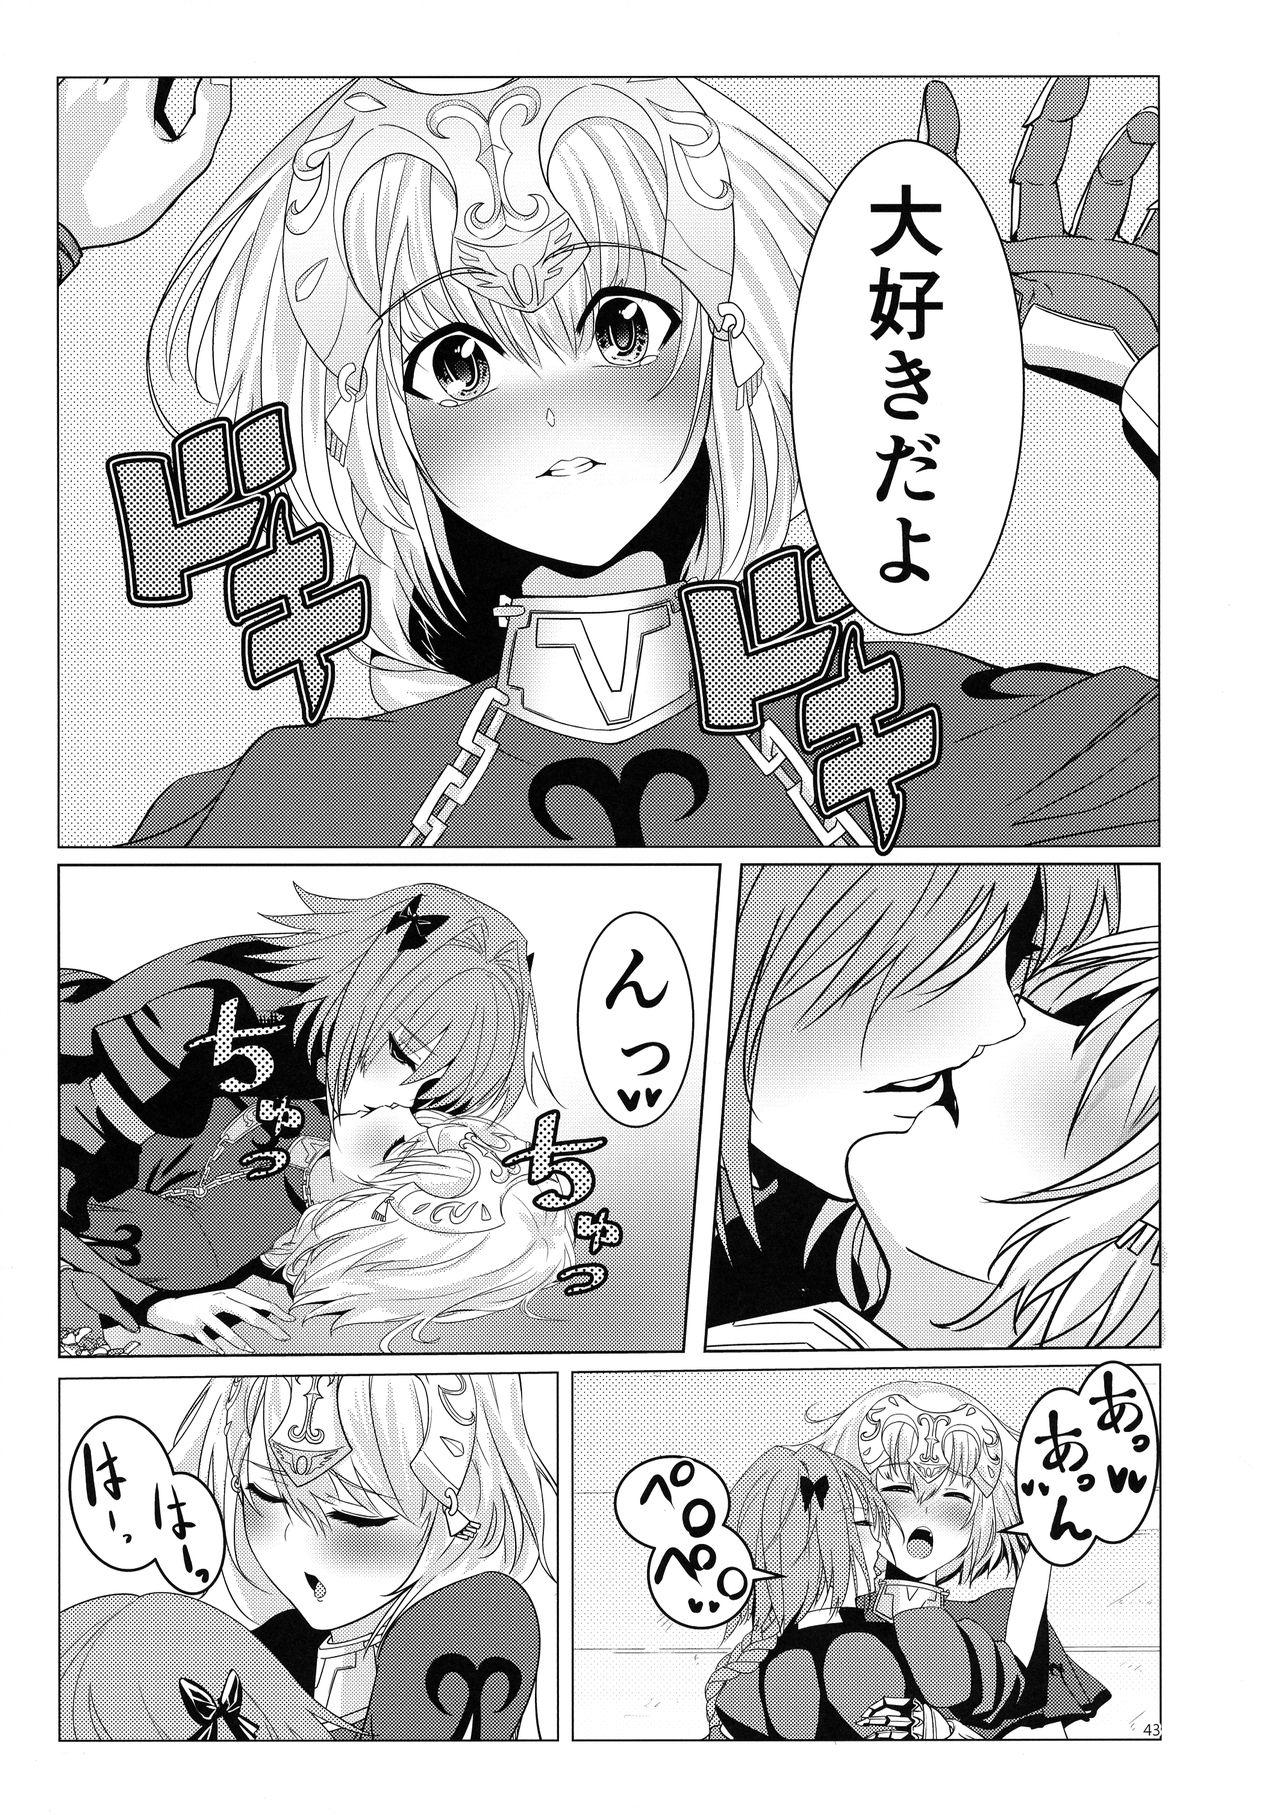 Matching Spirits - Jeanne and Astolfo have sex 39